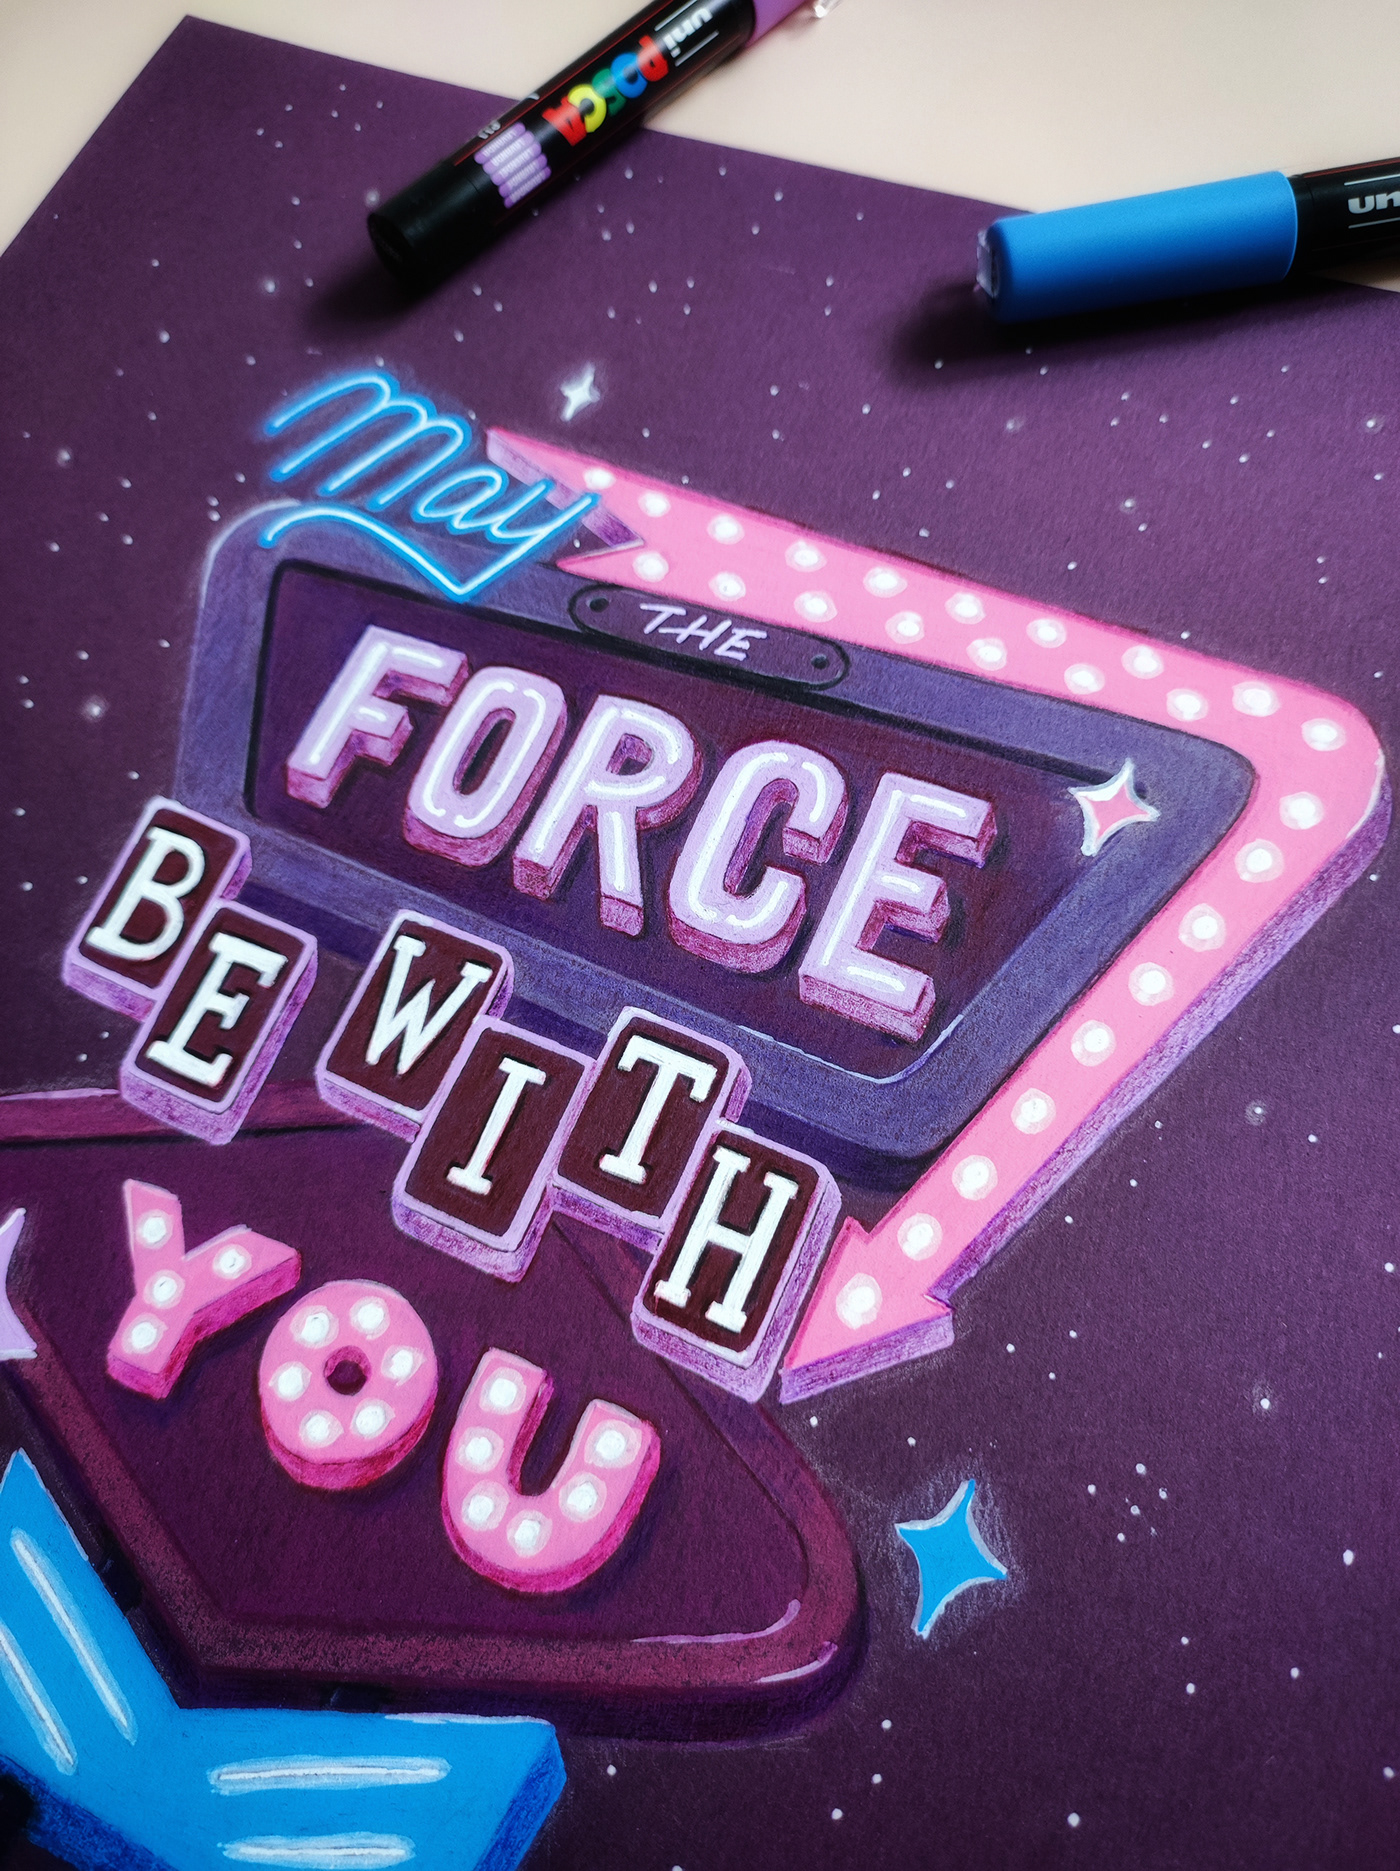 handwritten lettering star wars lettering for postcards may the force be with you retro sign lettering postcards леттеринг открытка иллюстрация Posca